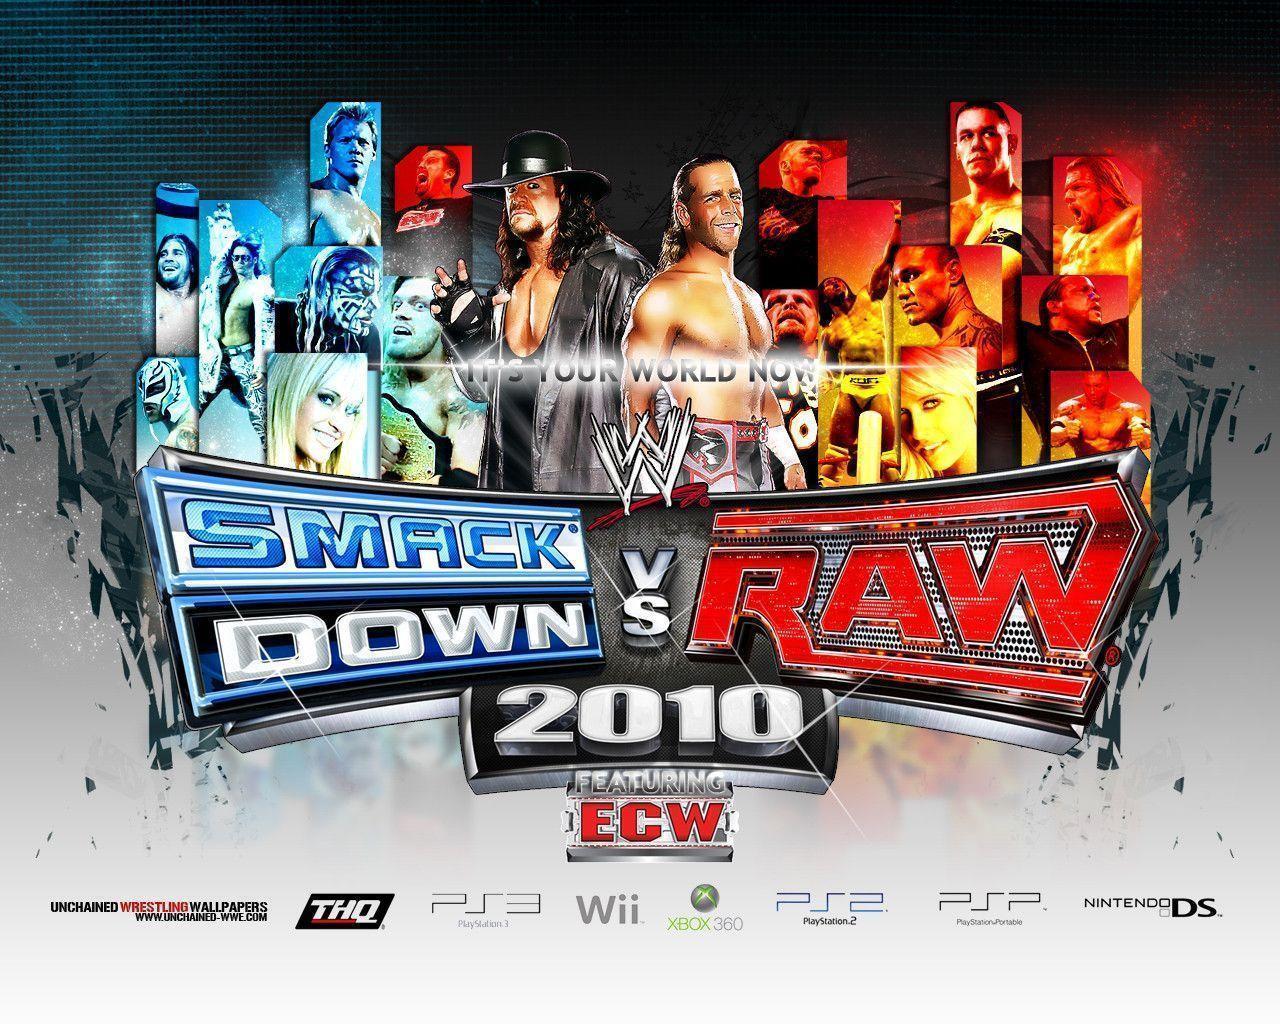 WWE SmackDown! vs Raw 2010 Wallpapers ~ Unchained